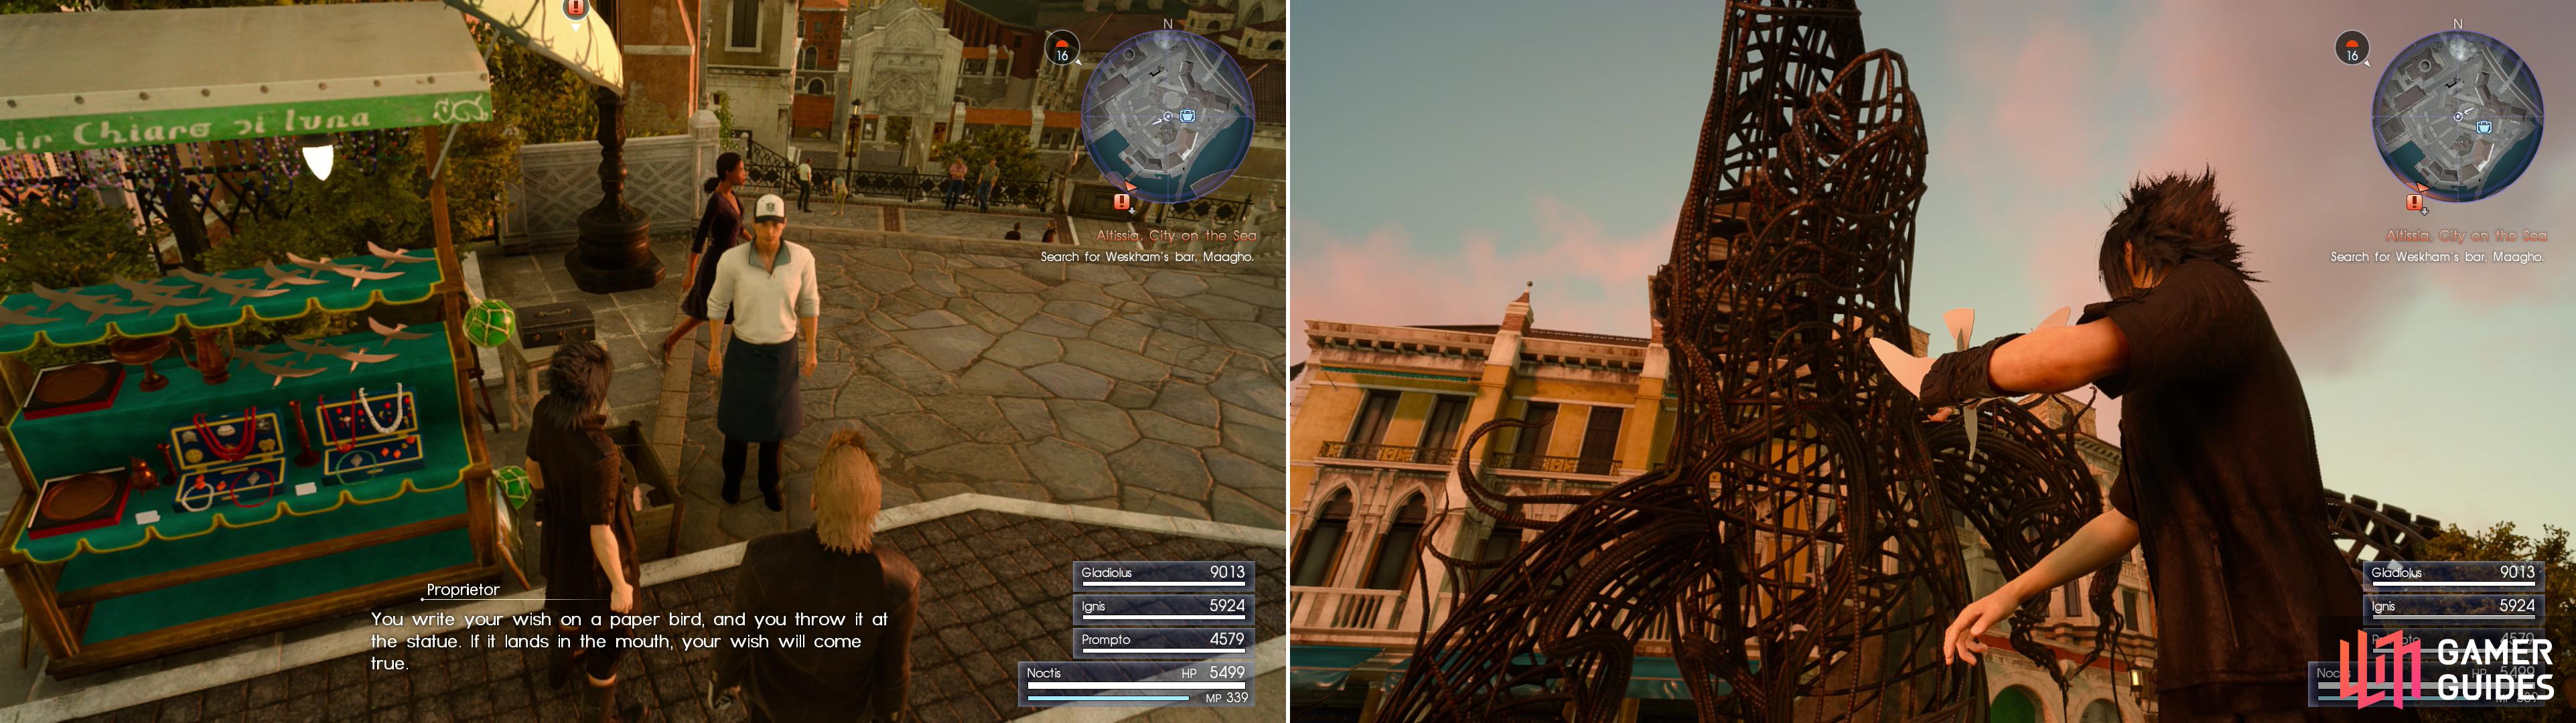 Visit the palace-front plaza to find new merchants (left) and indulge in a Altissian tradition (right).